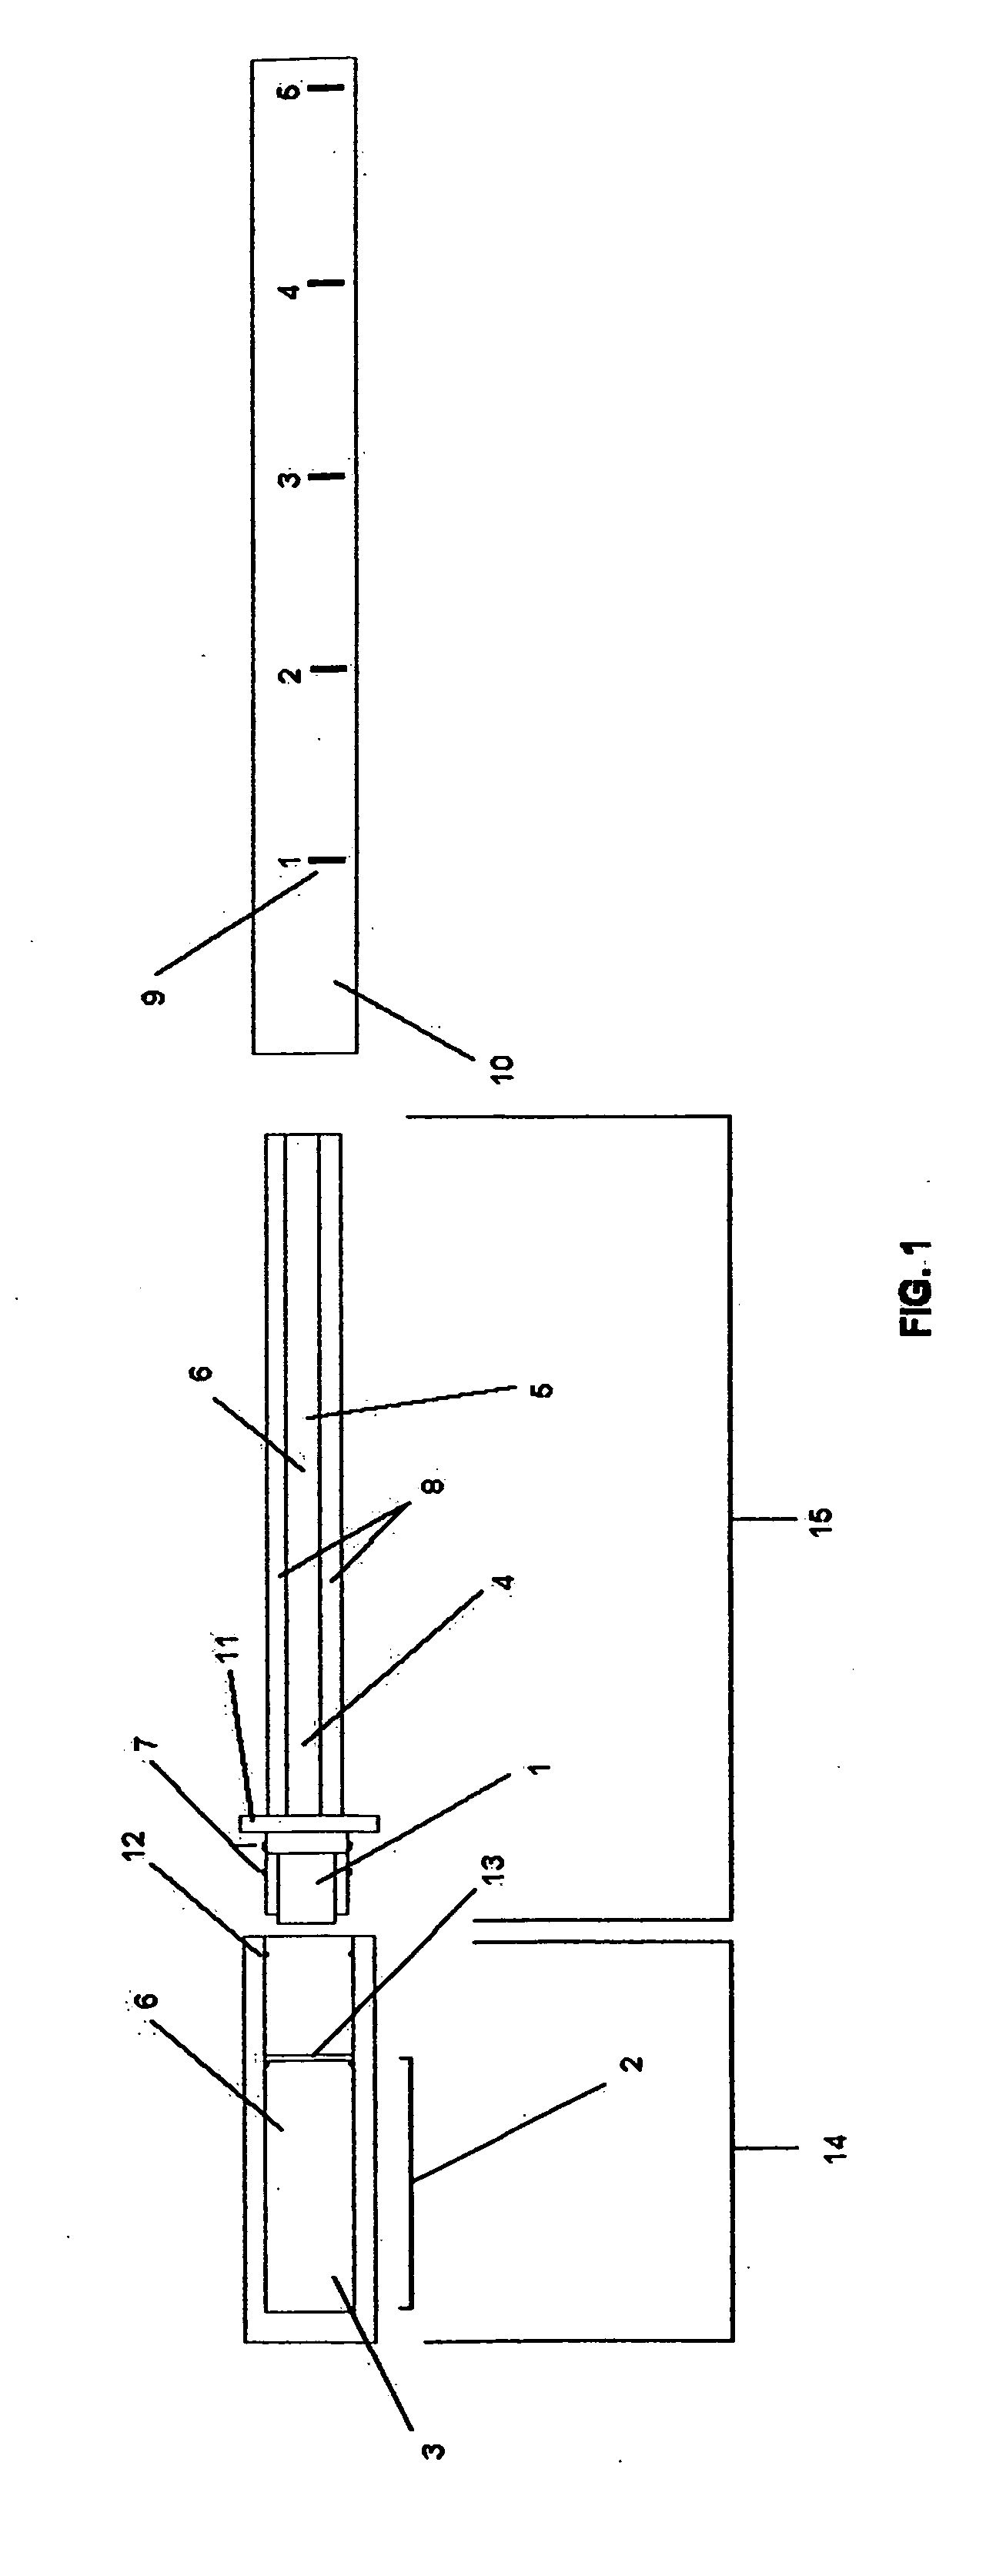 Systems and methods for measuring sodium concentration in saliva